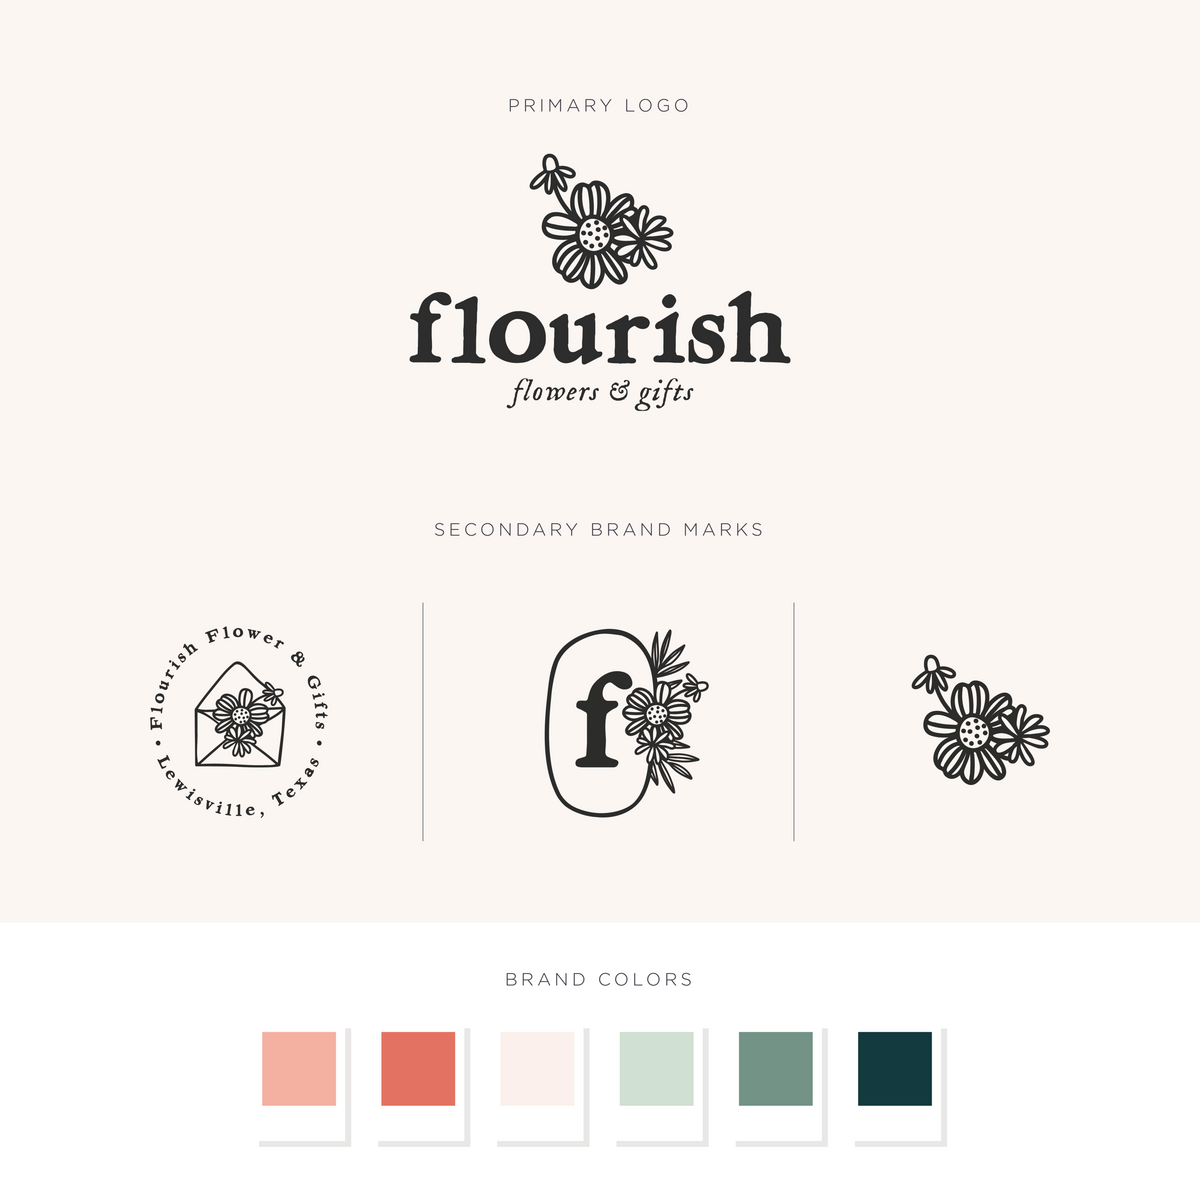 Flourish Flowers & Gifts logos and brand colors